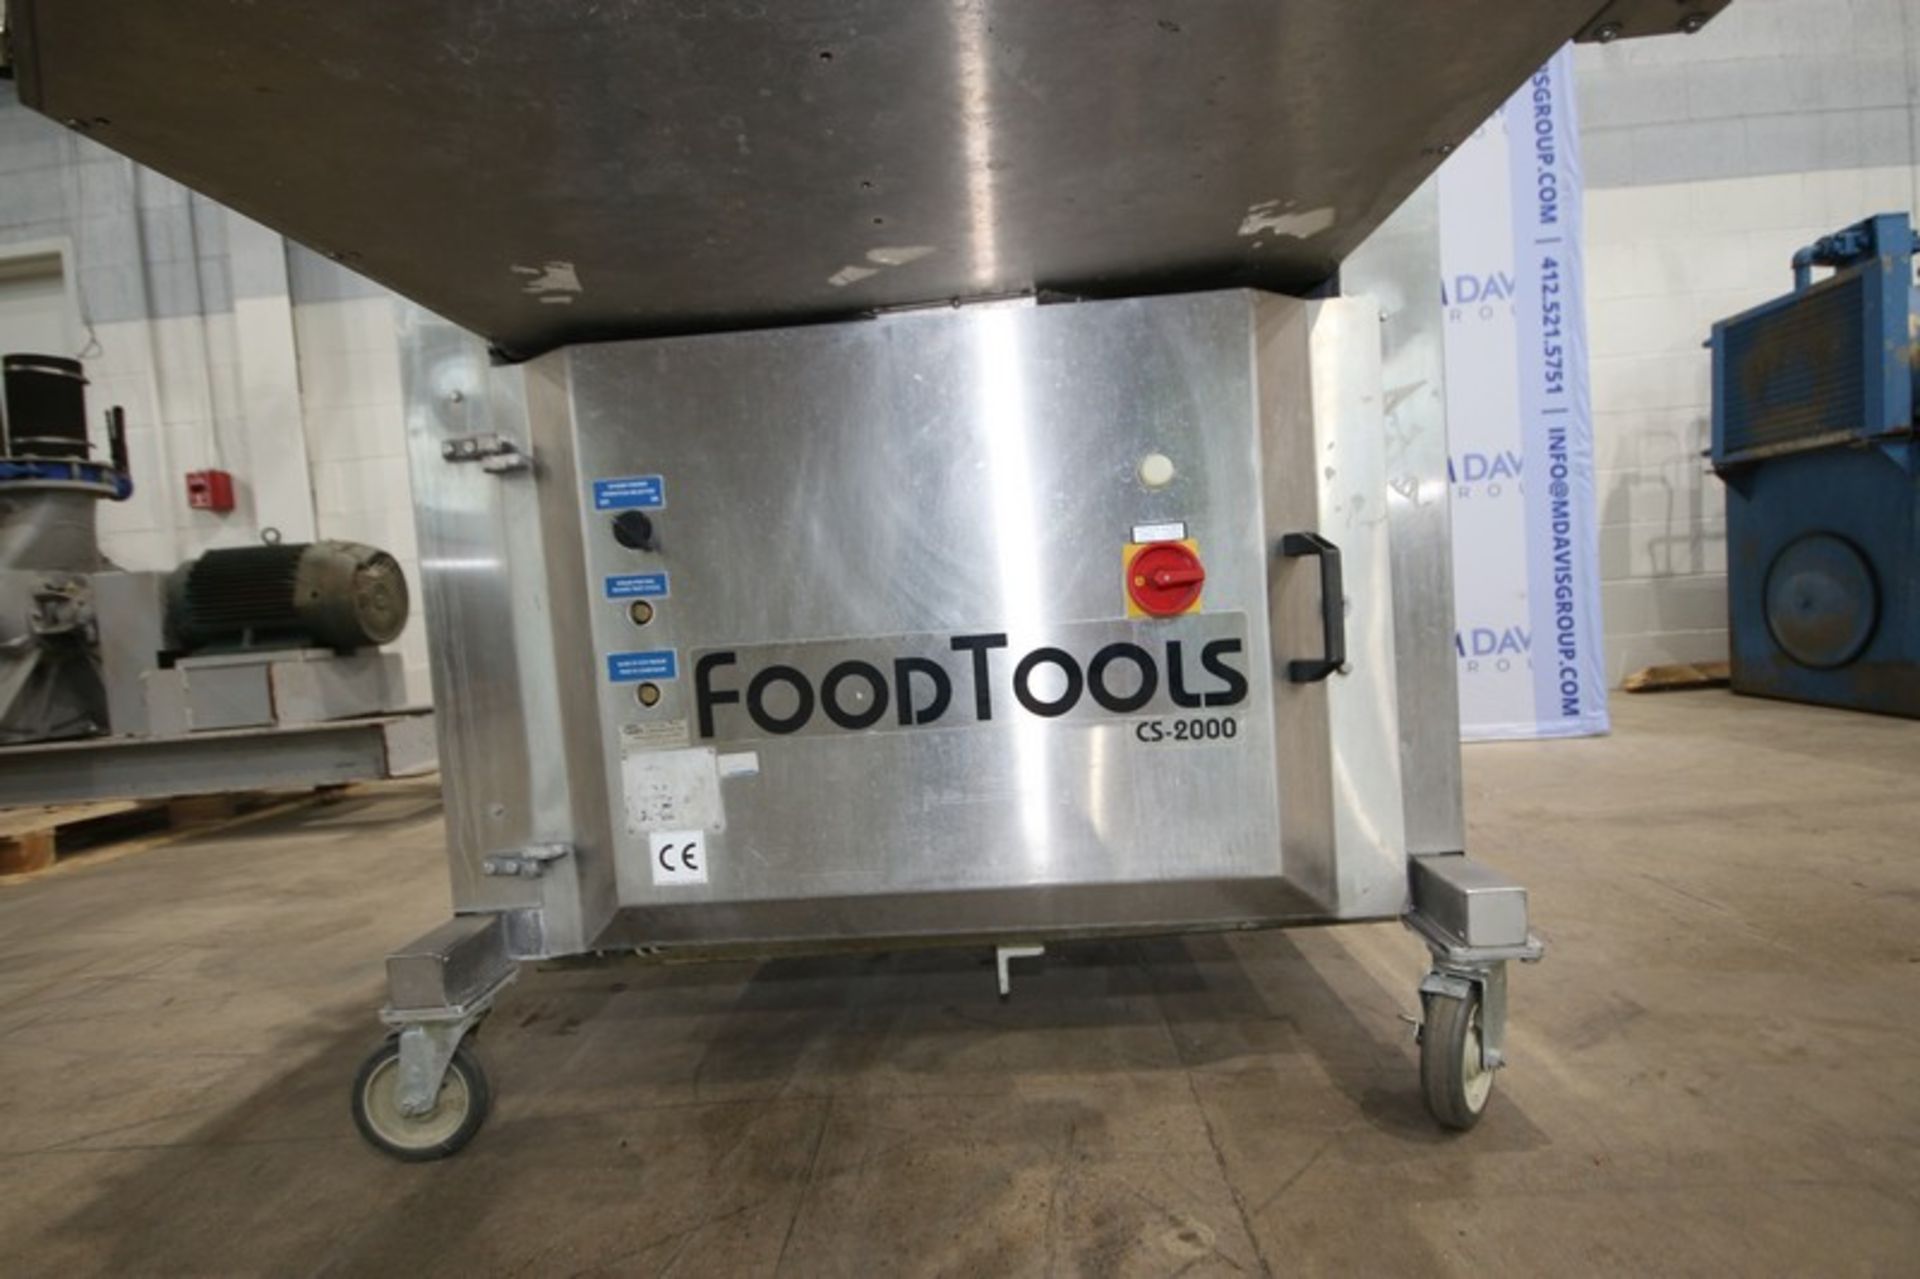 FoodTools S/S Cake Slicer, M/N CS-2000, S/N 3206, 110/220 Volts, Mounted on Portable S/S Frame - Image 9 of 10